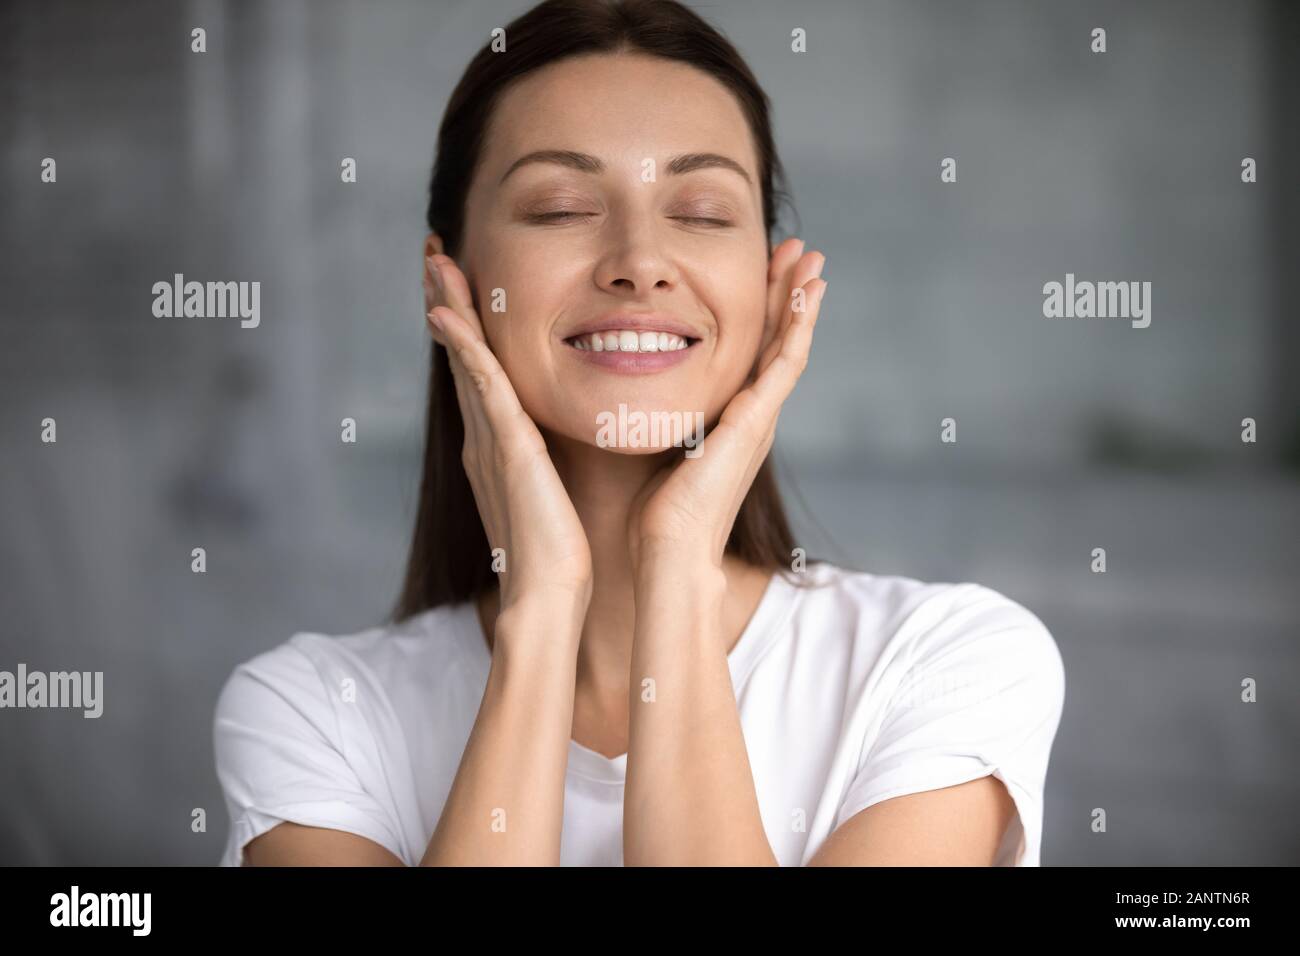 Head shot satisfied smiling woman with perfect skin touching face Stock Photo